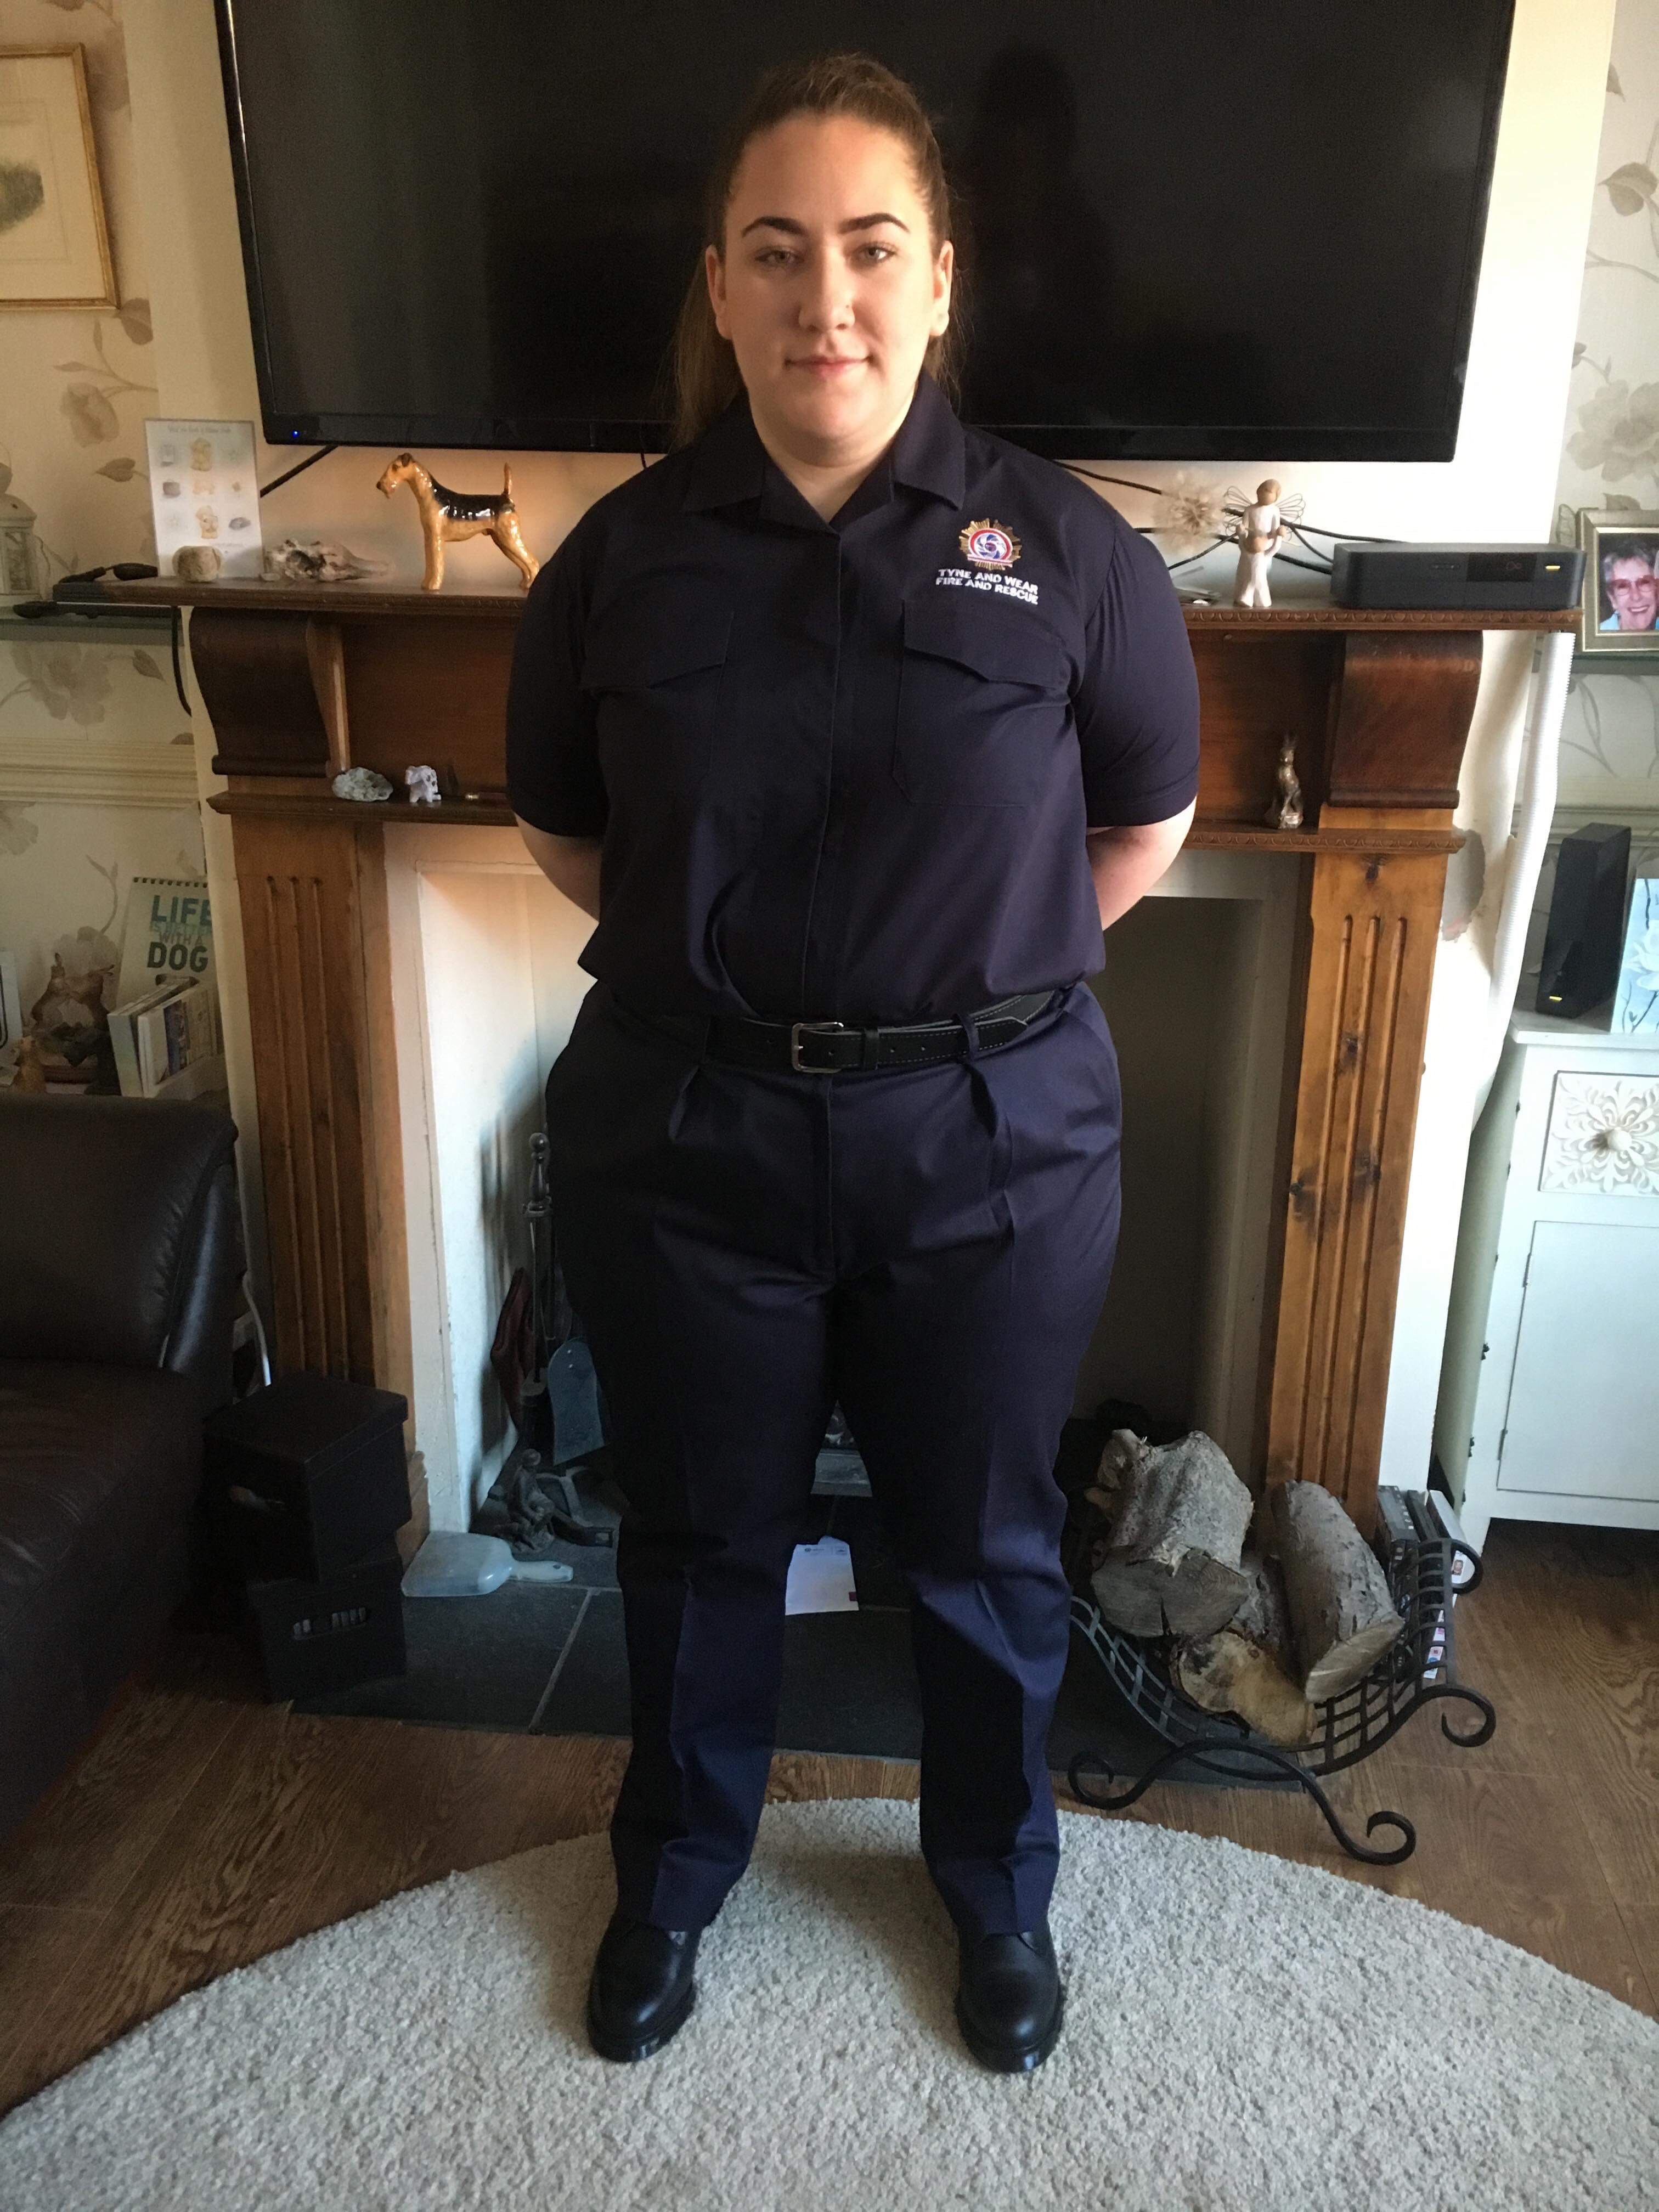 Tamsin in her Tyne and Wear Fire and Rescue Service uniform